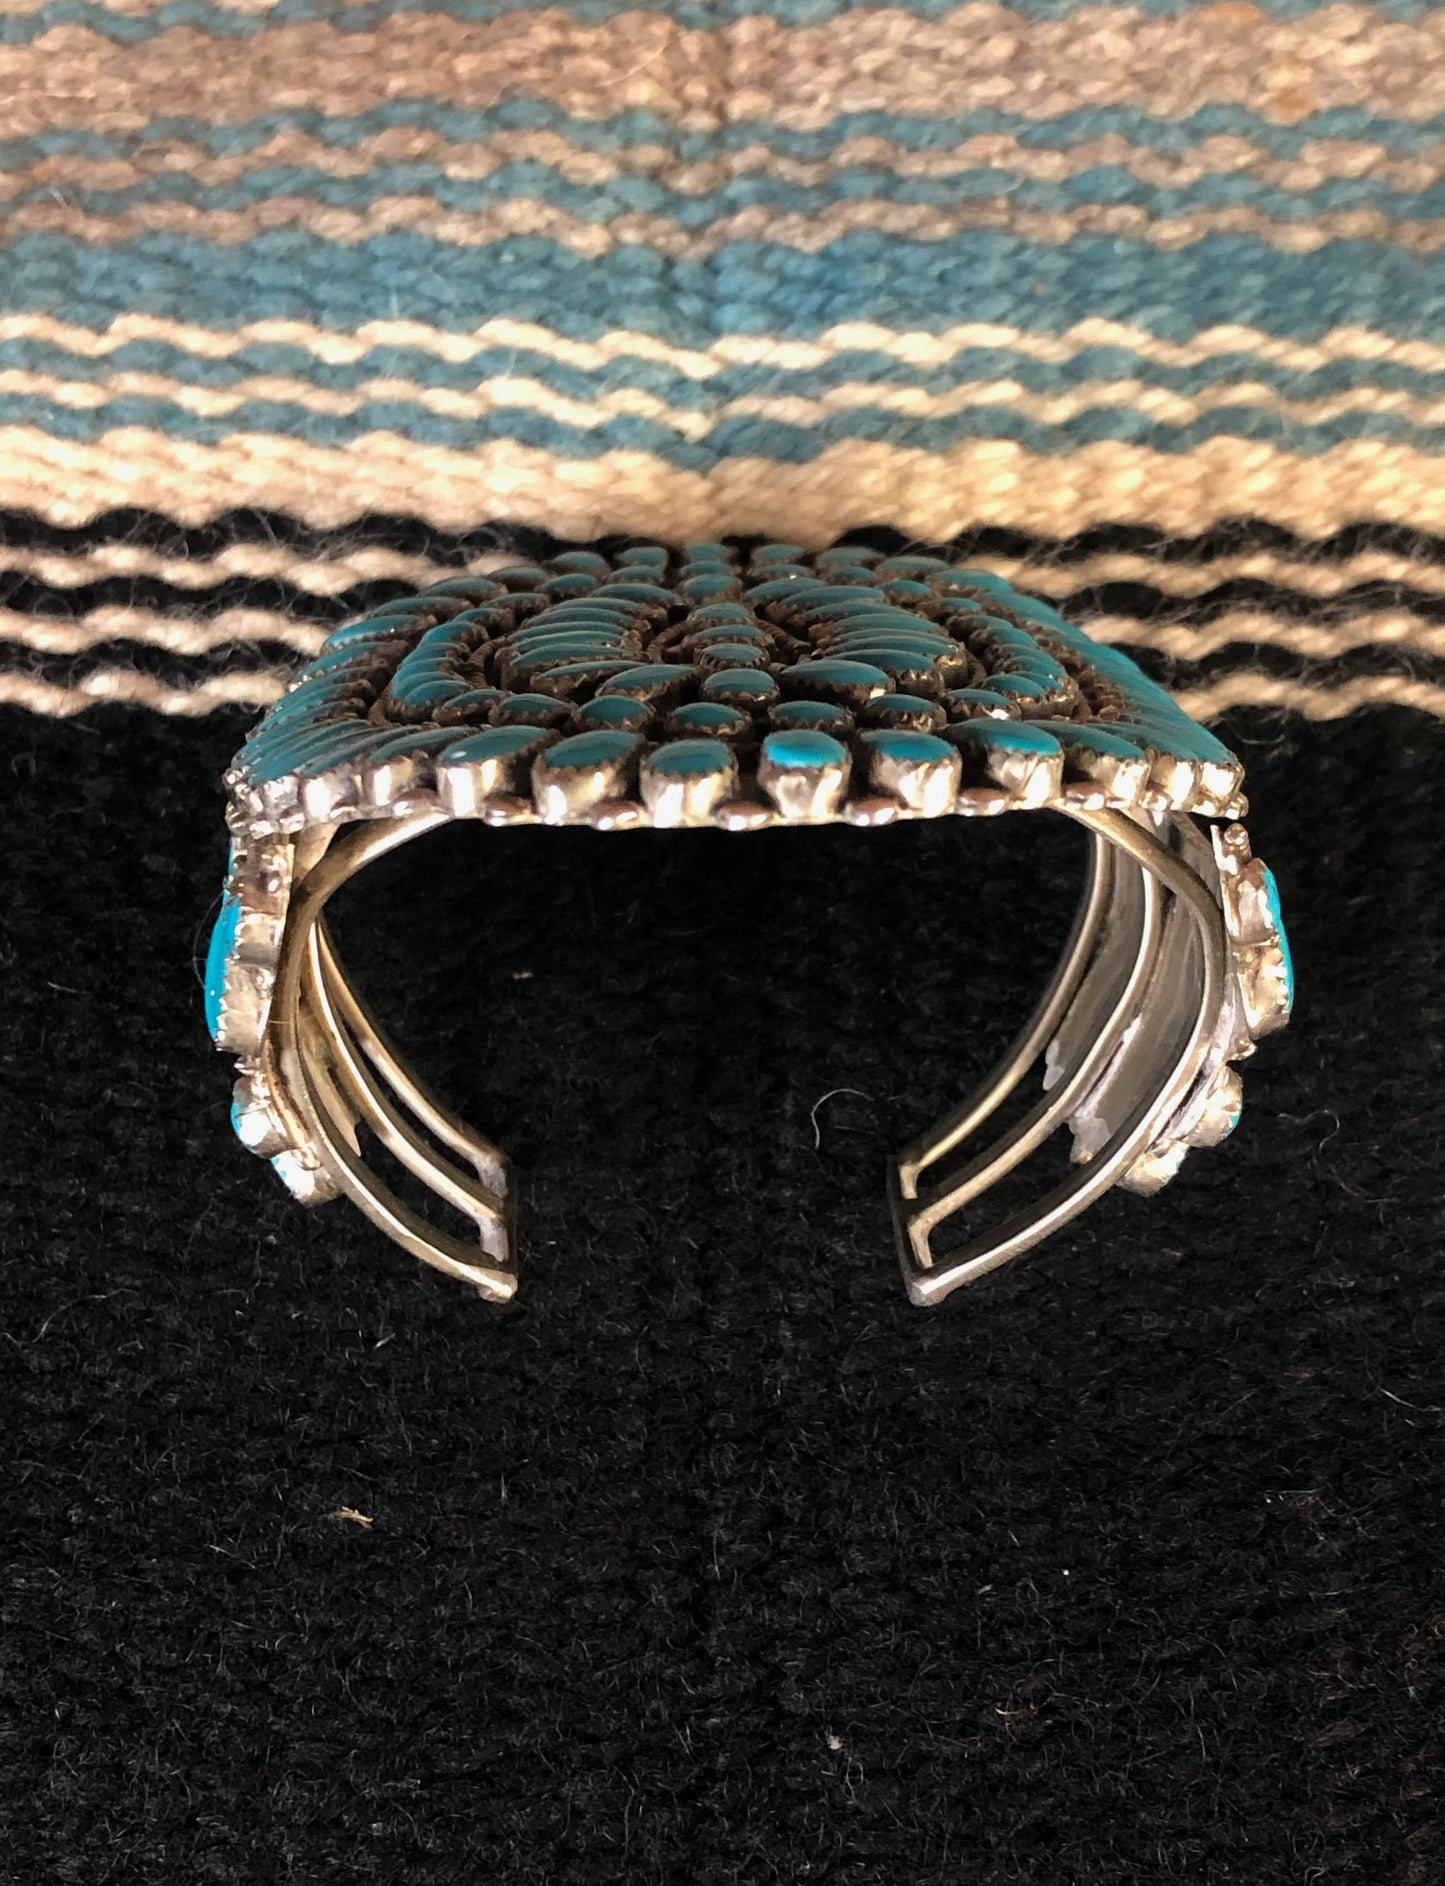 Vintage 40's Zuni Sterling Silver And Turquoise Large Cuff Bracelet